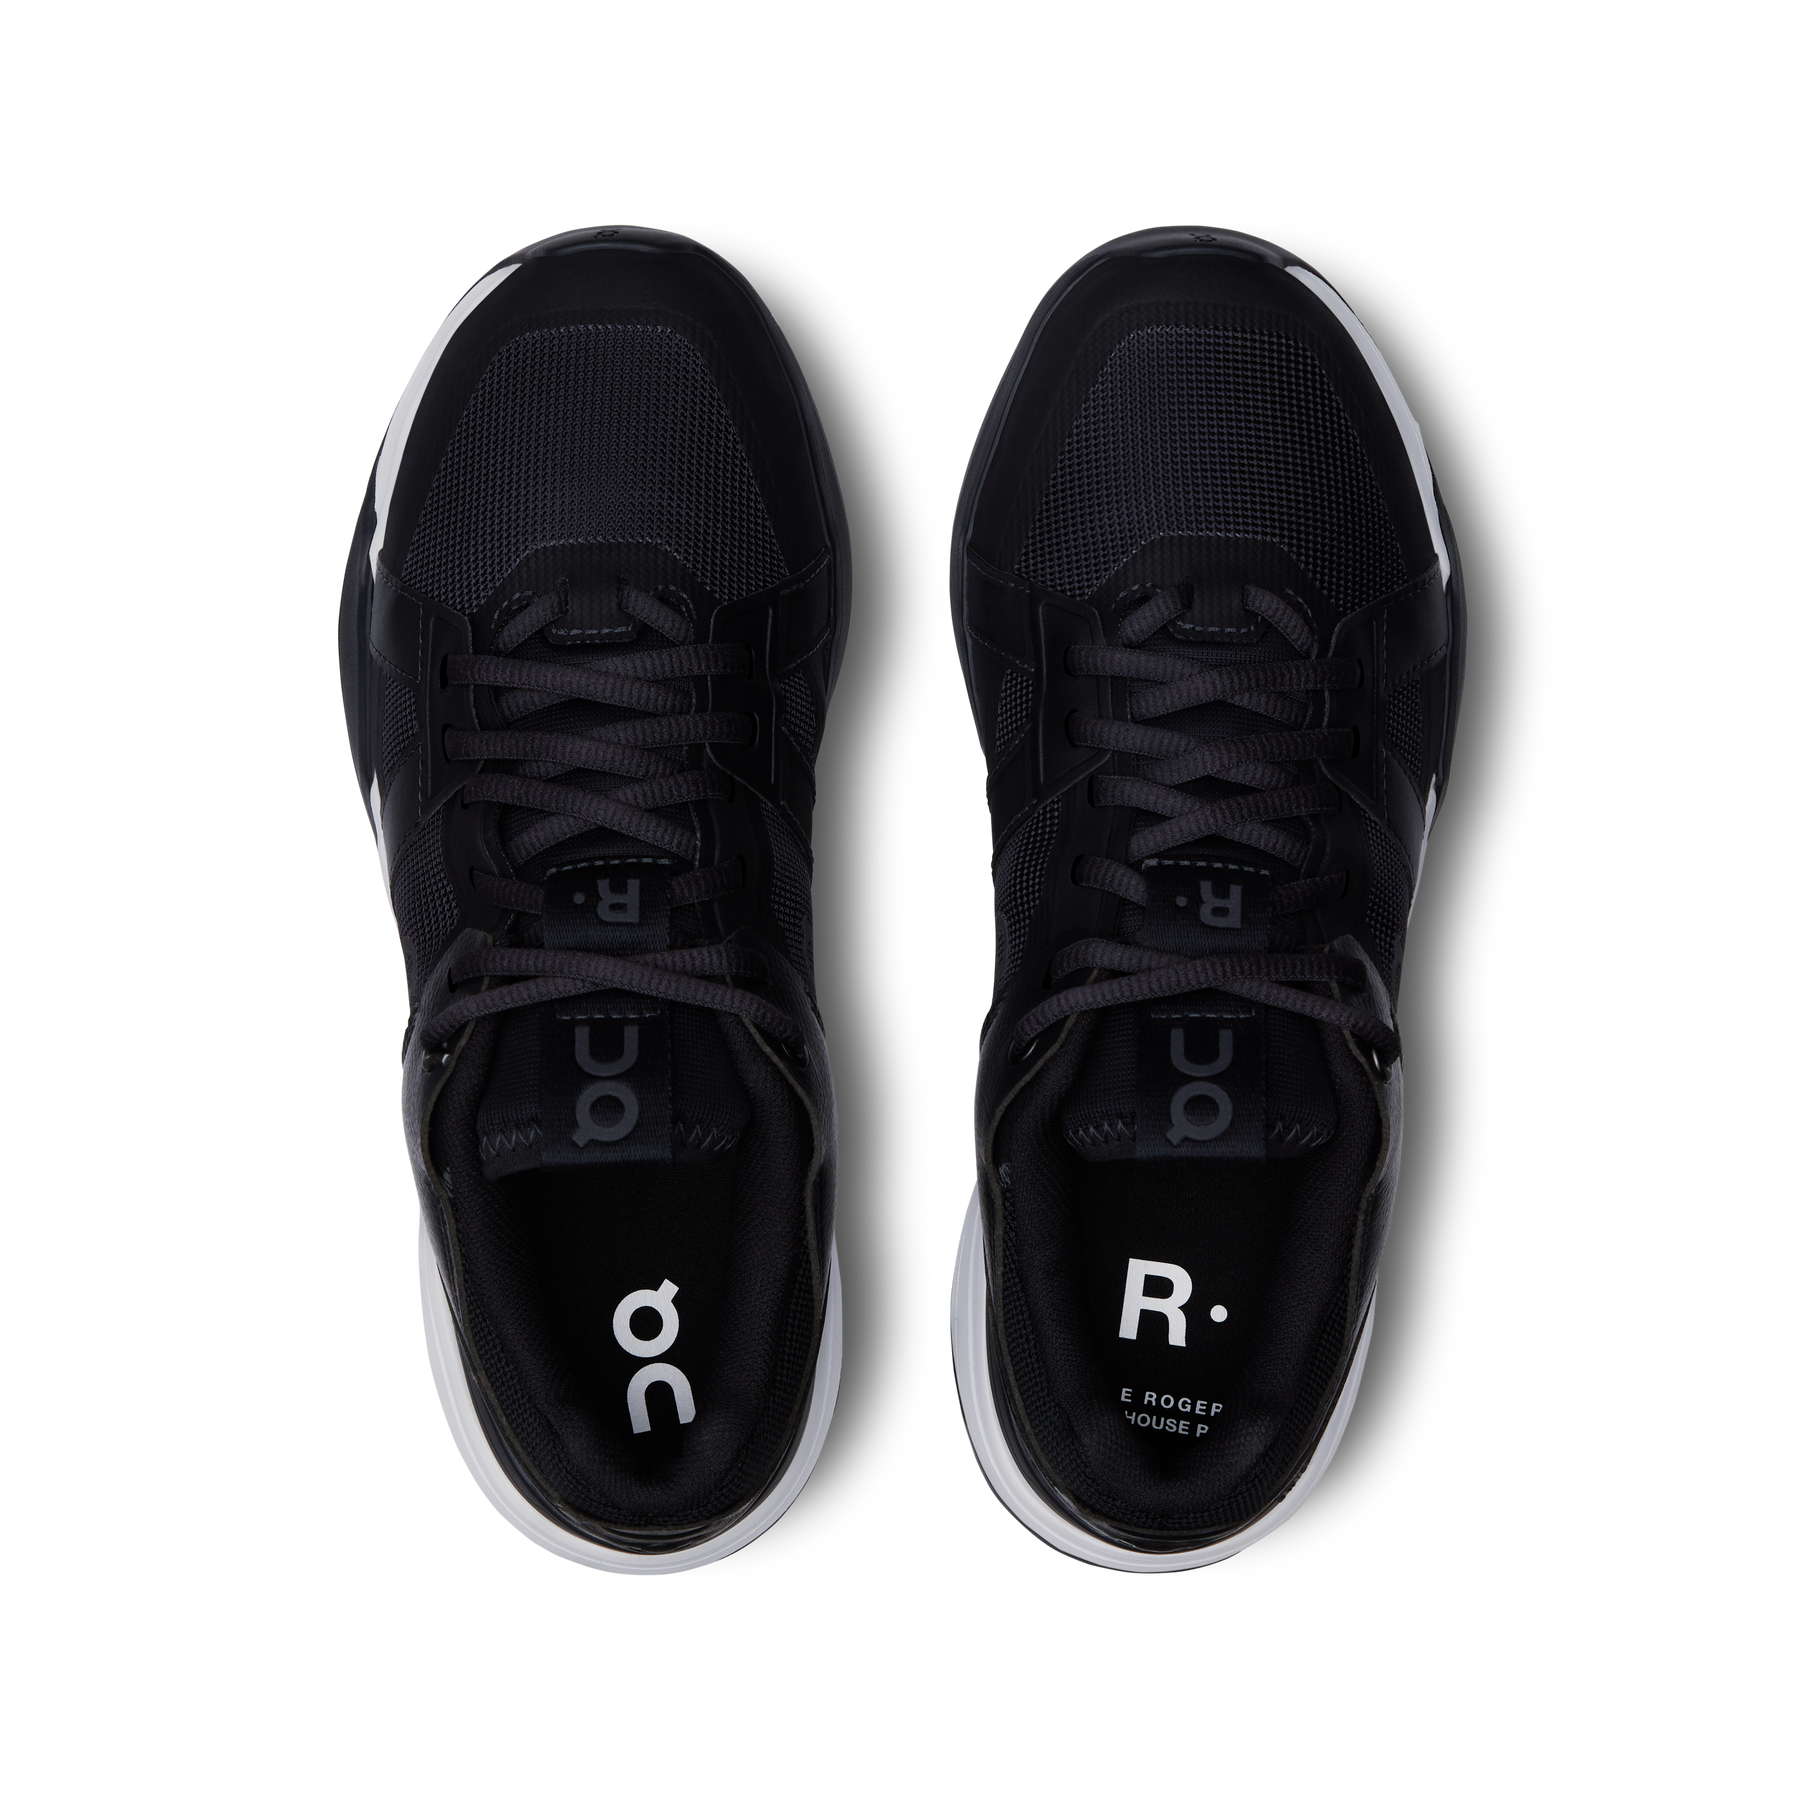 On The Roger Clubhouse Pro Mens Tennis Shoes (Black/White)